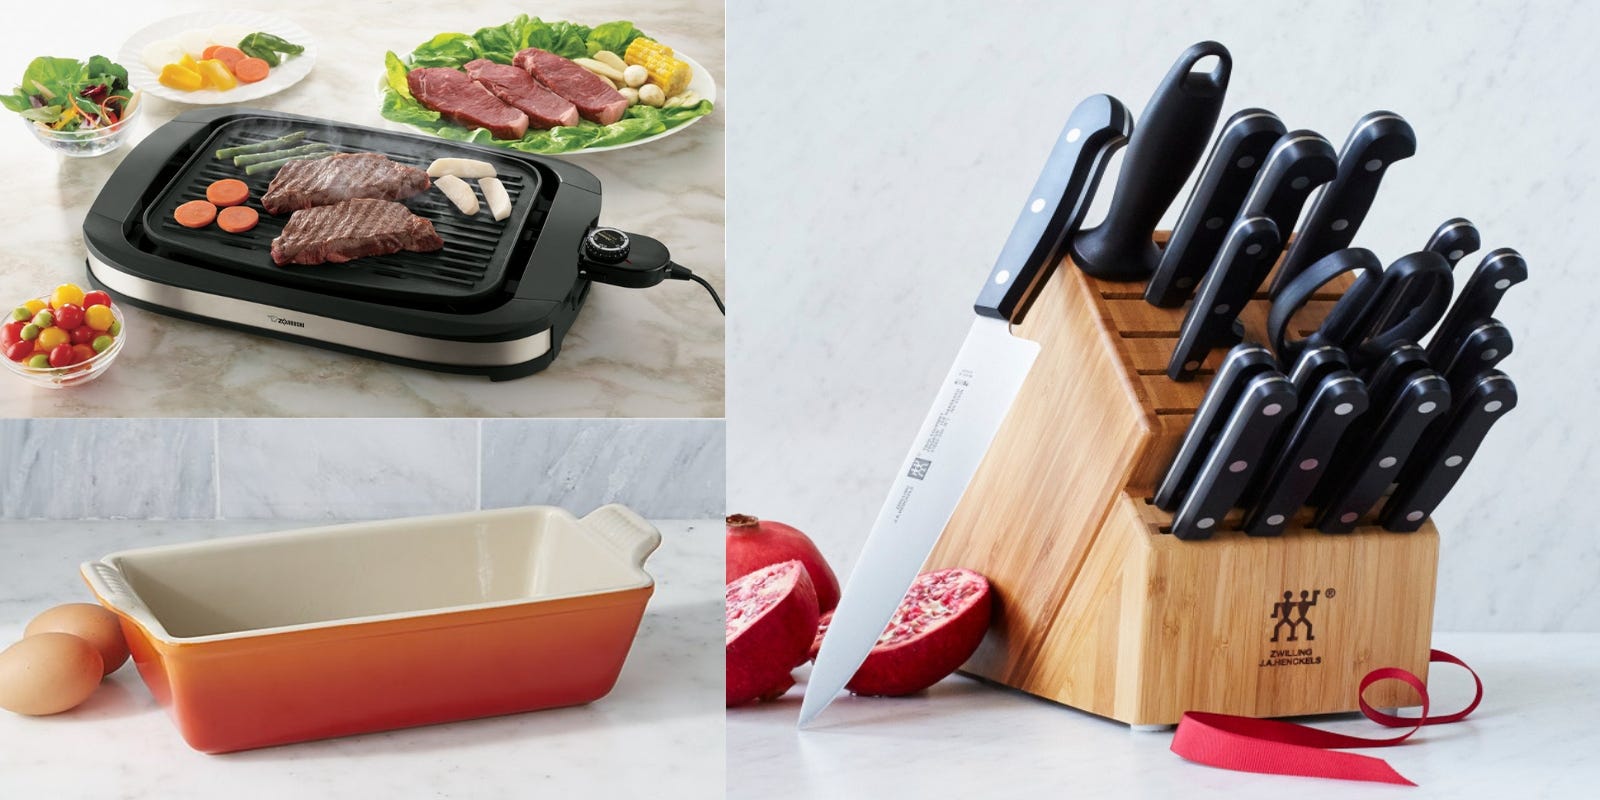 The best kitchen gifts of 2018: 19 gifts for all kinds of cooks